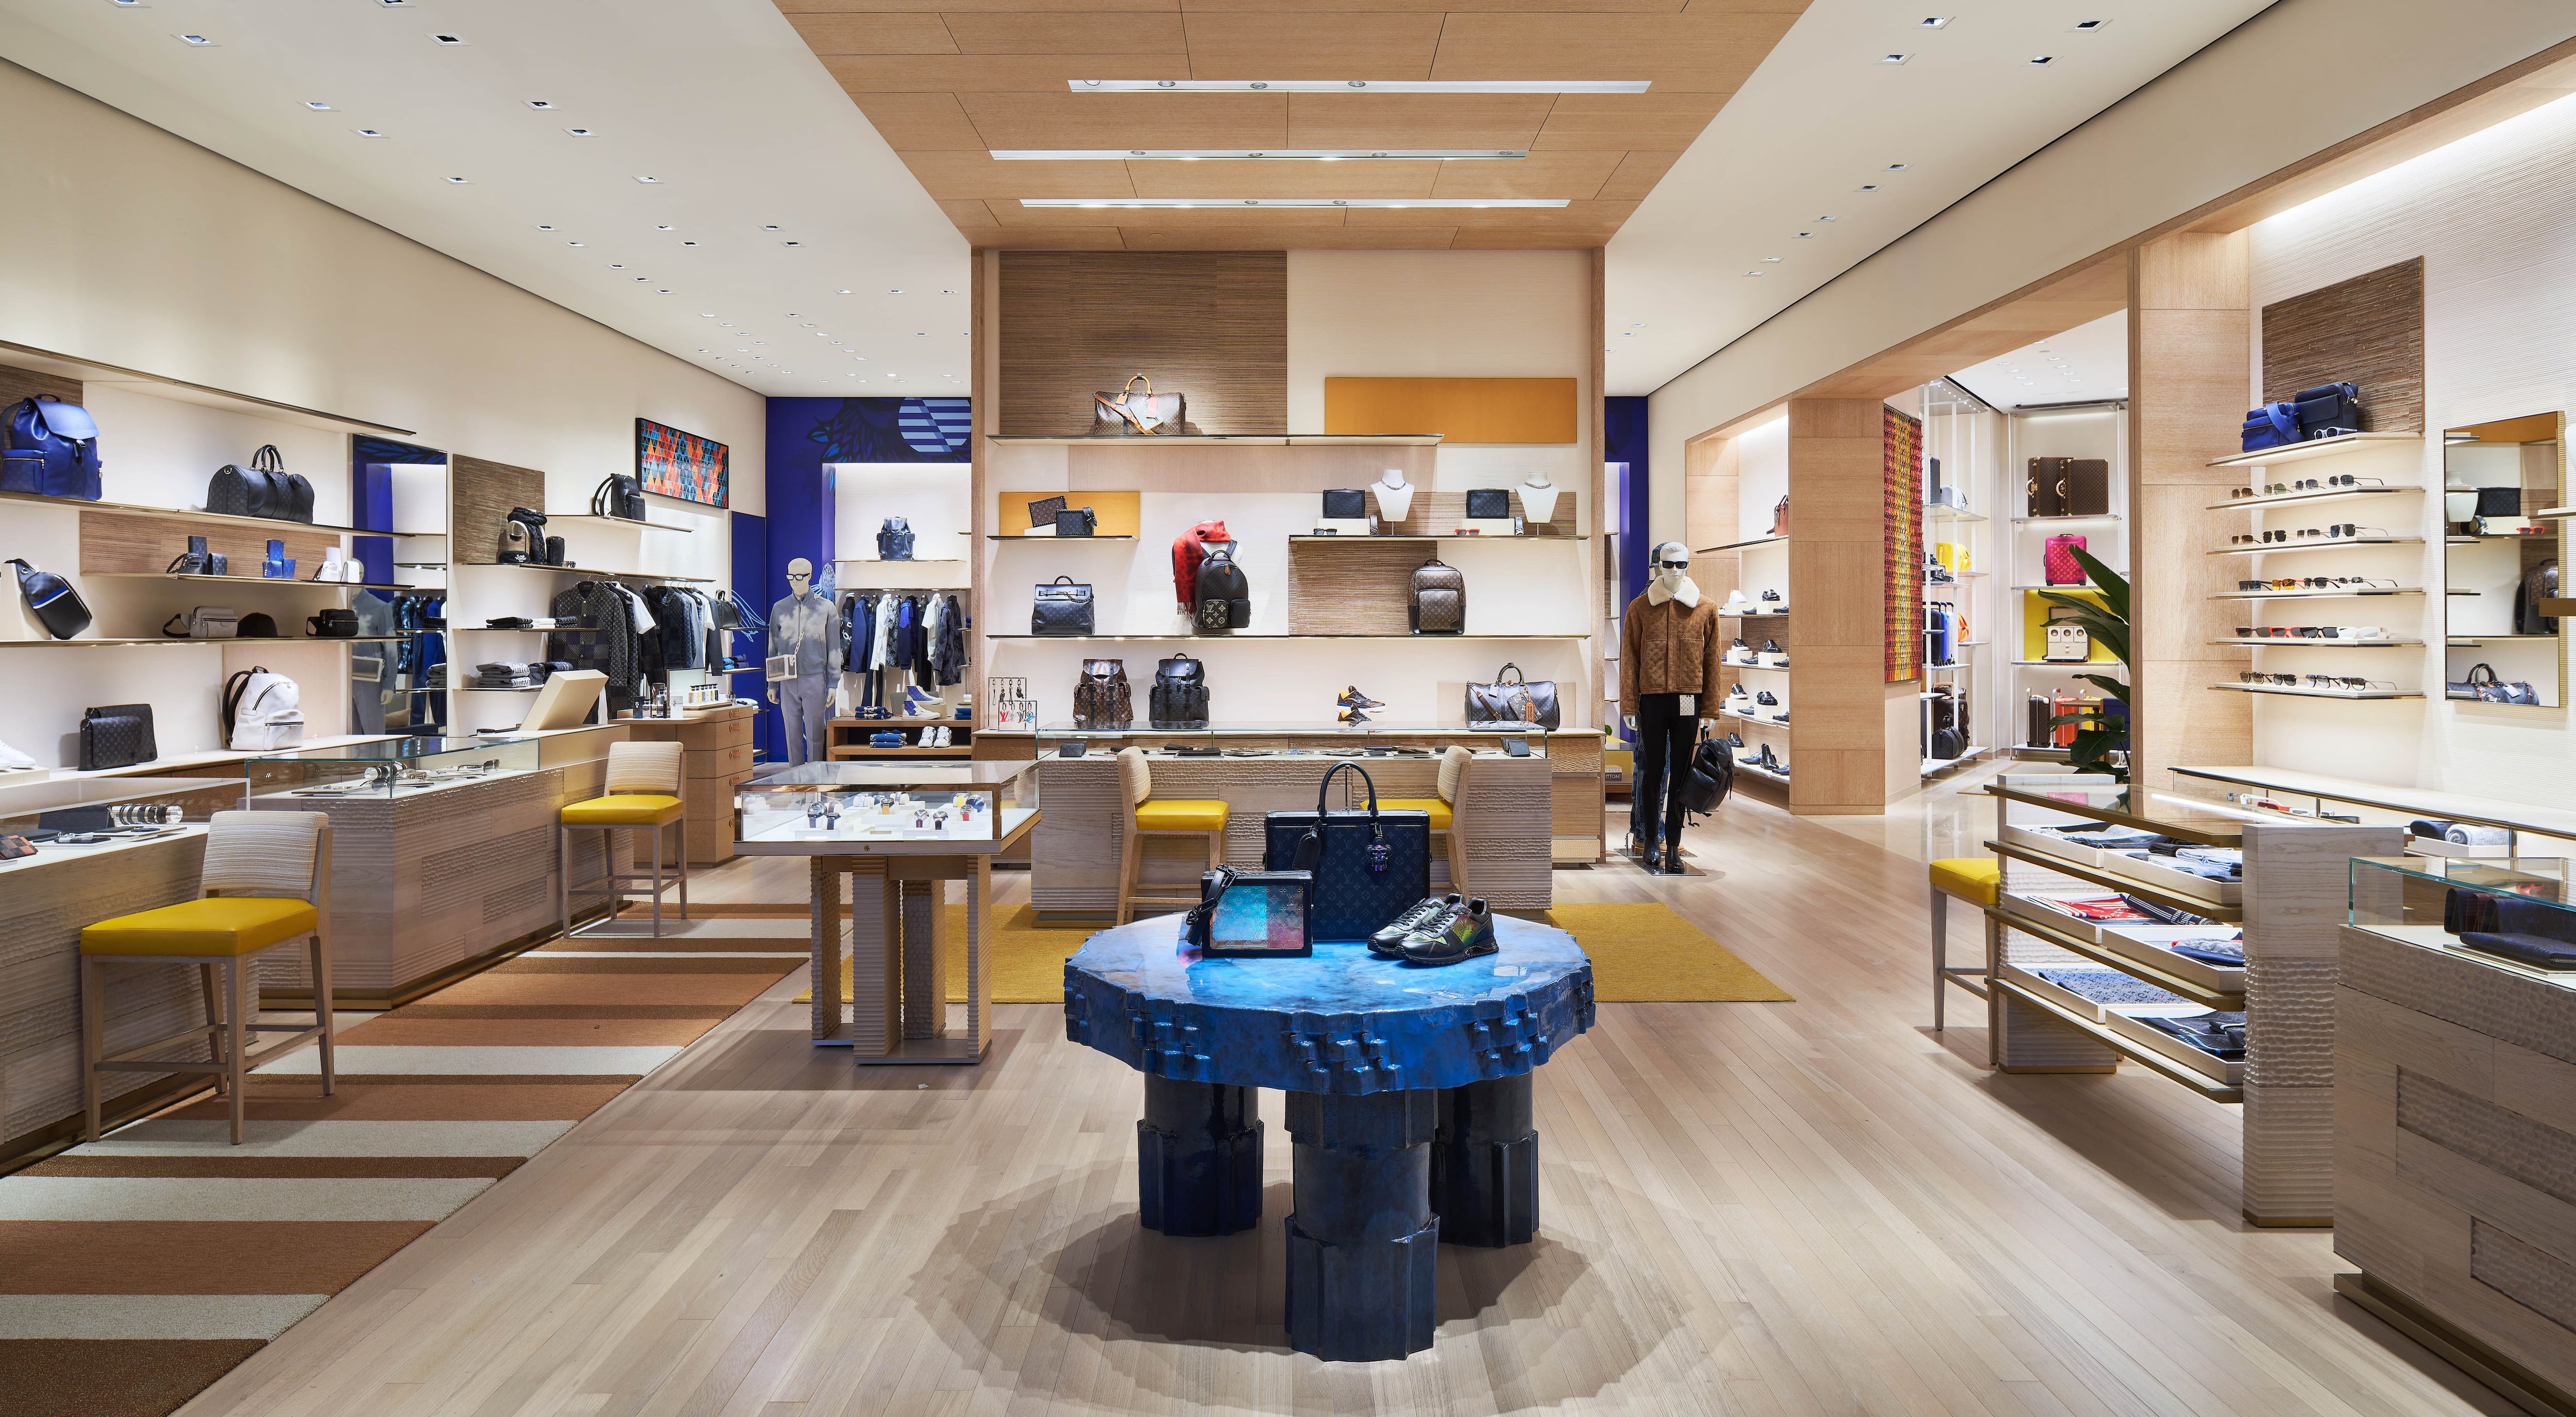 Louis Vuitton store showcasing collaboration with Japanese artist